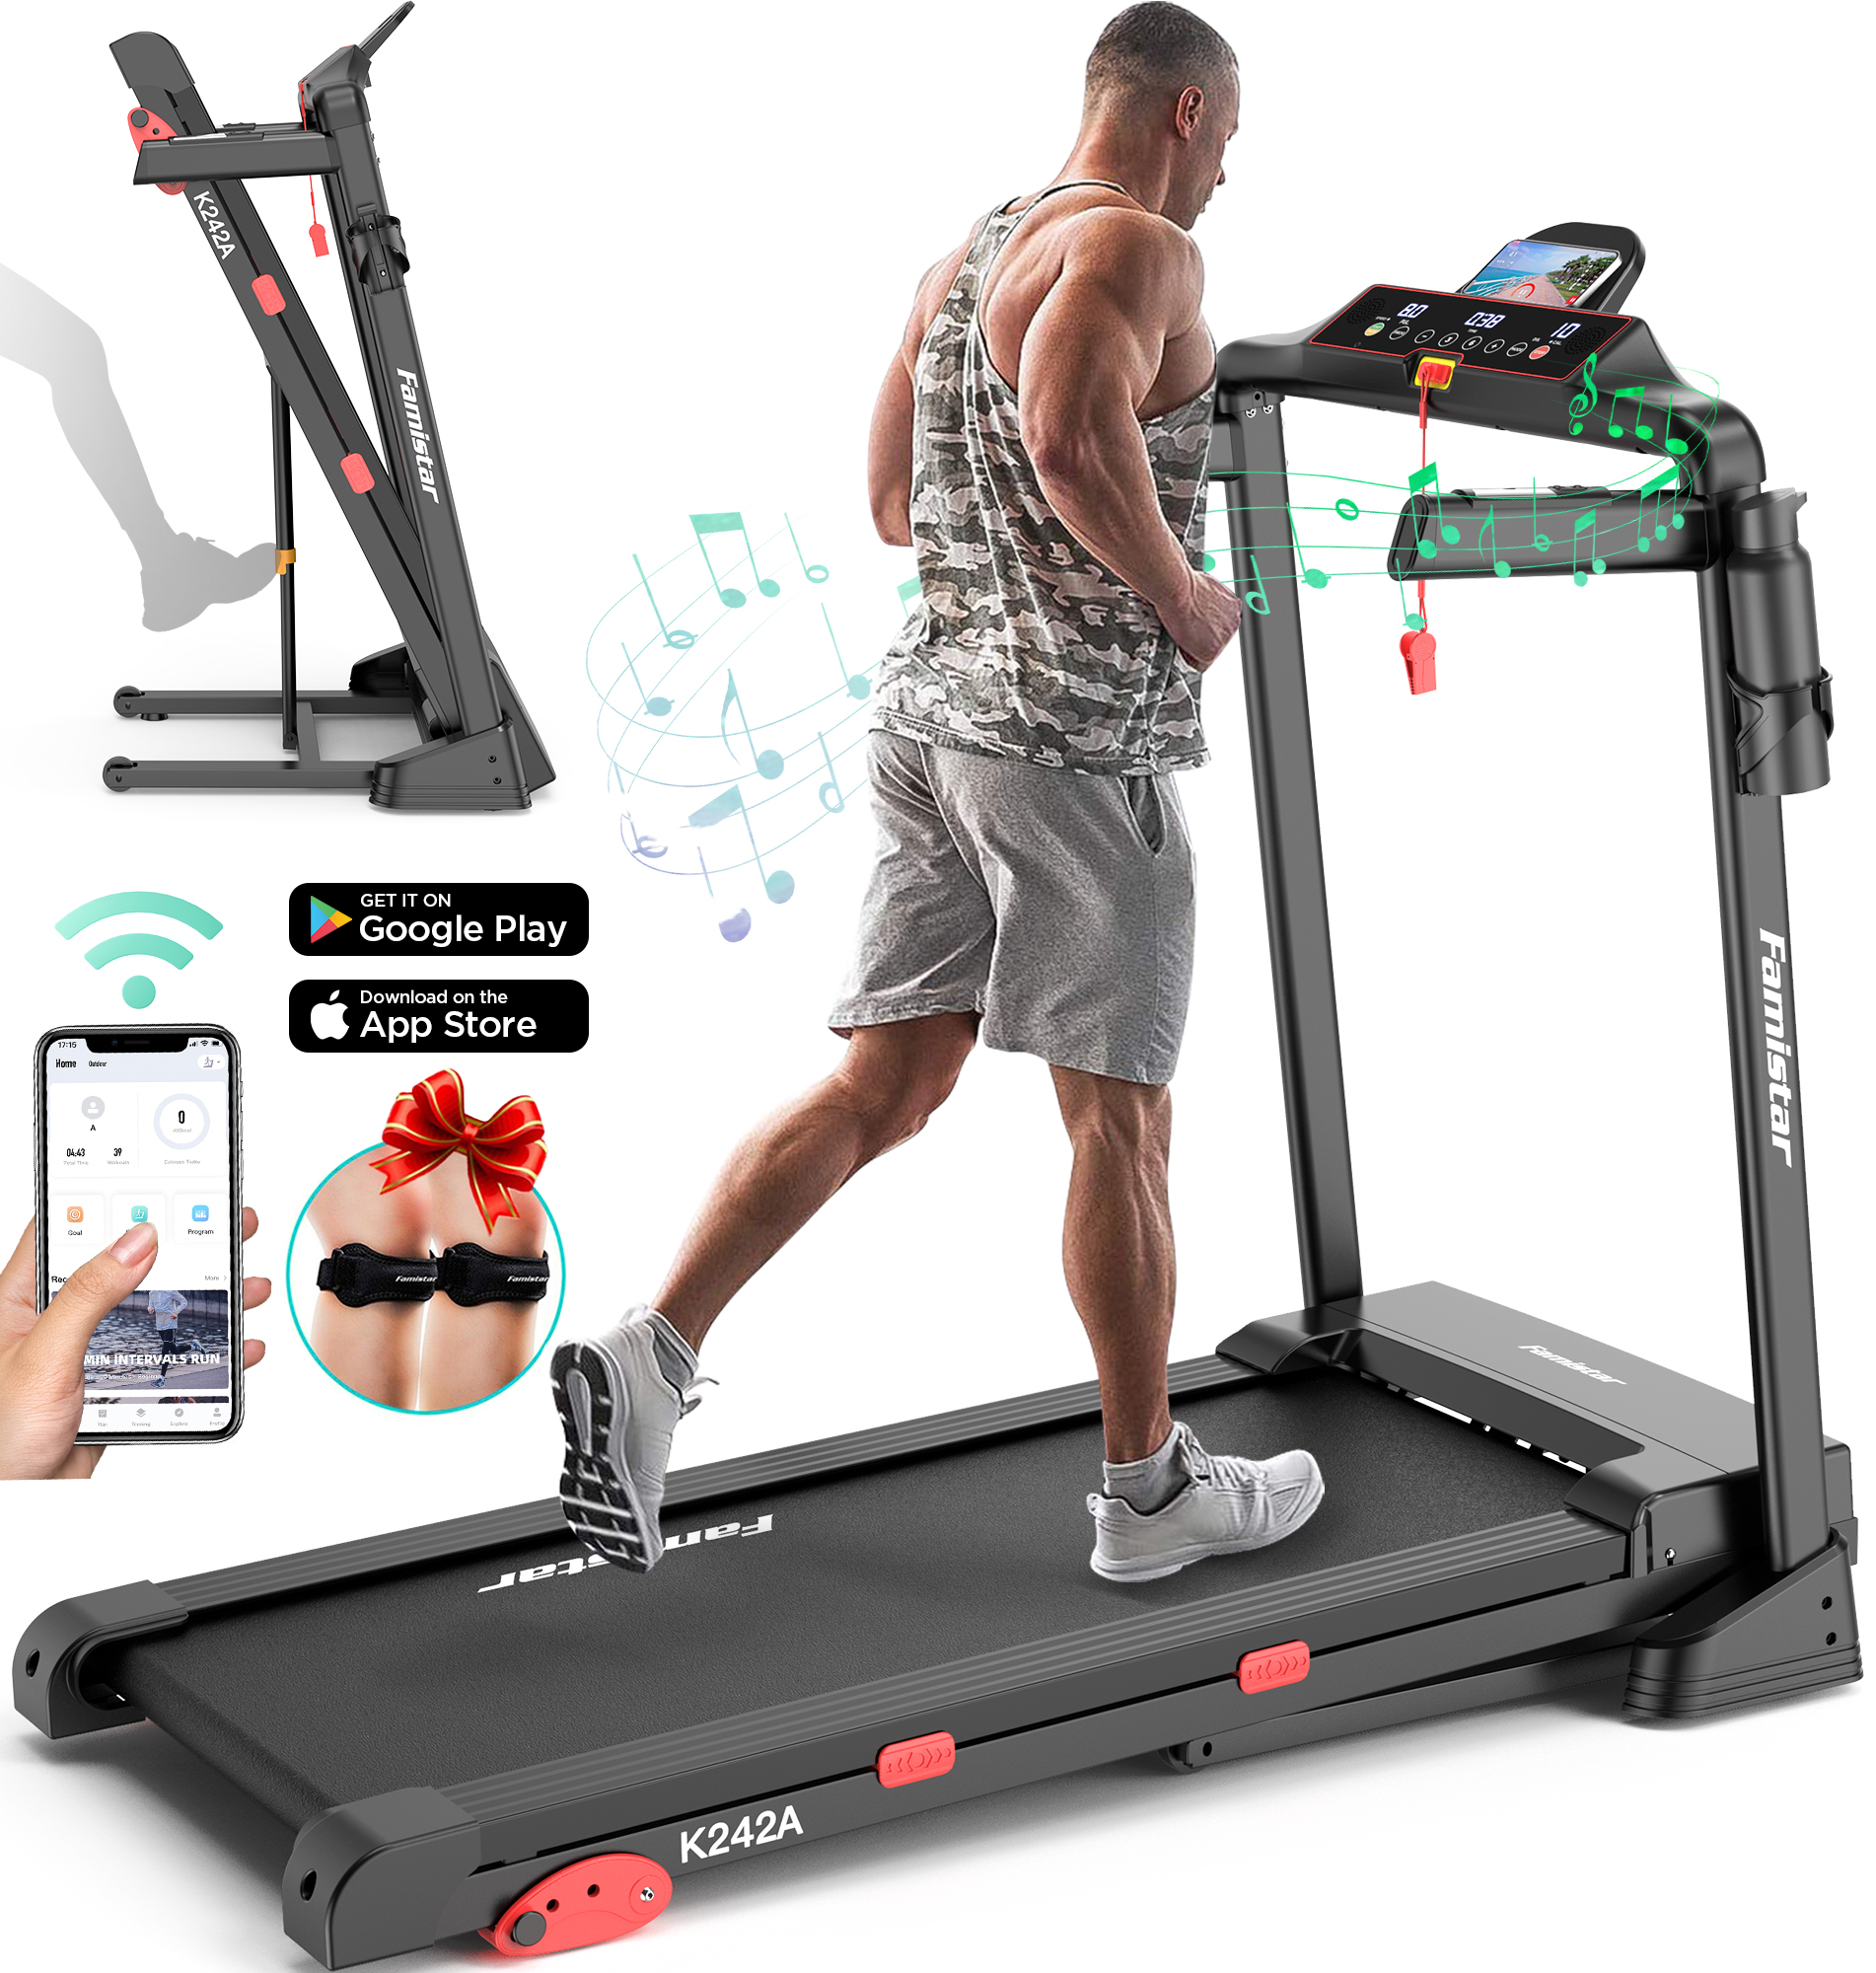 Folding Treadmill for Home with Adjustable Incline, Smart APP, 8MPH Speed, 250lbs, HiFi Bluetooth Speakers, 15 Programs 3 Modes, 3.0HP Foldable Compact Treadmill Walking Running Machine - image 1 of 13